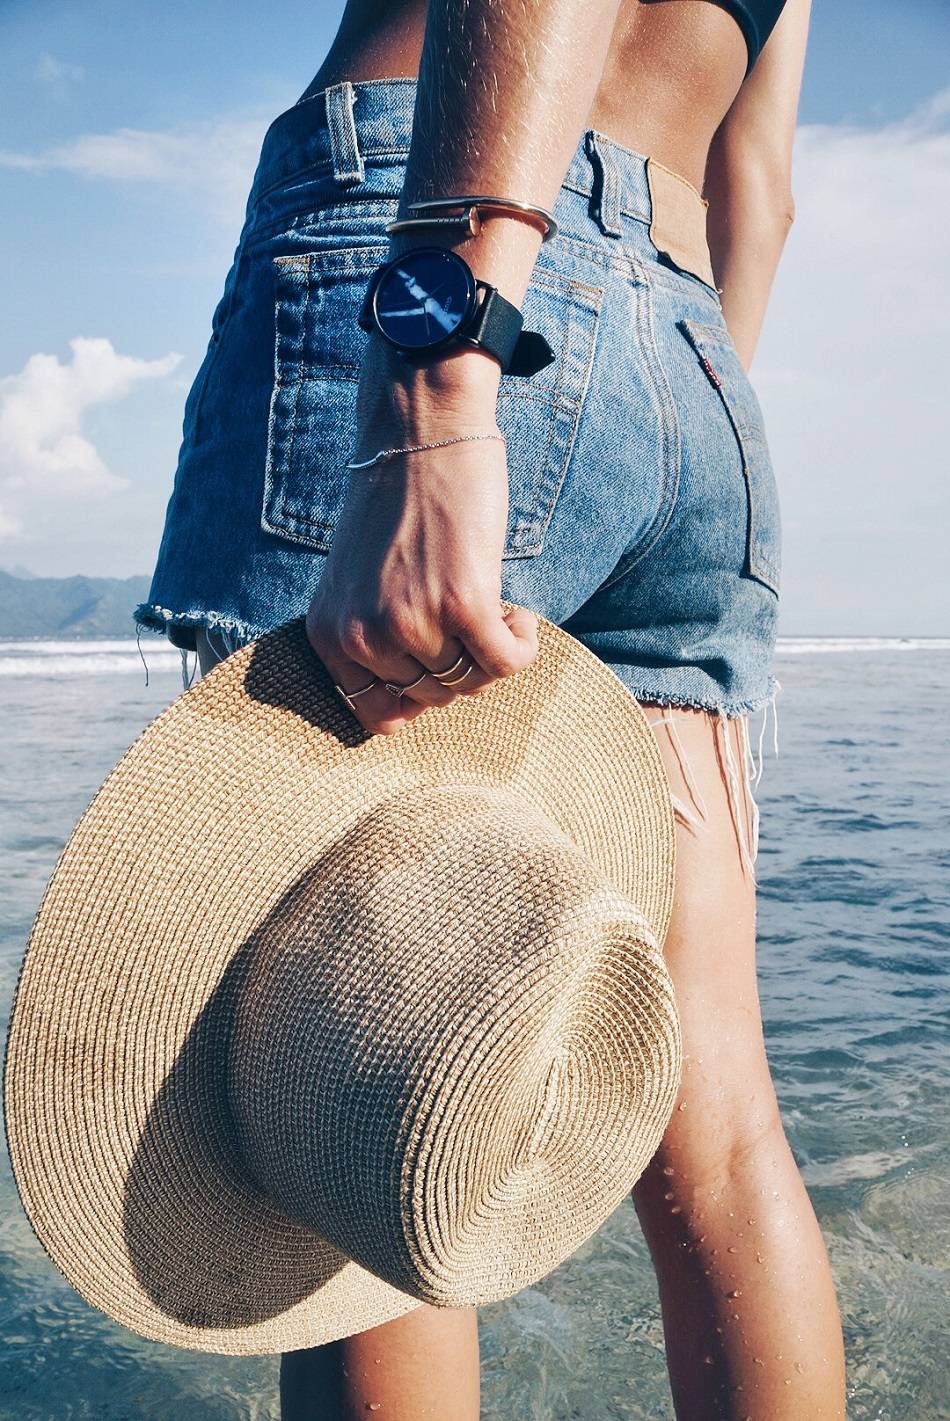 straw hat and vintage levi's shorts on beach with cluse marble watch